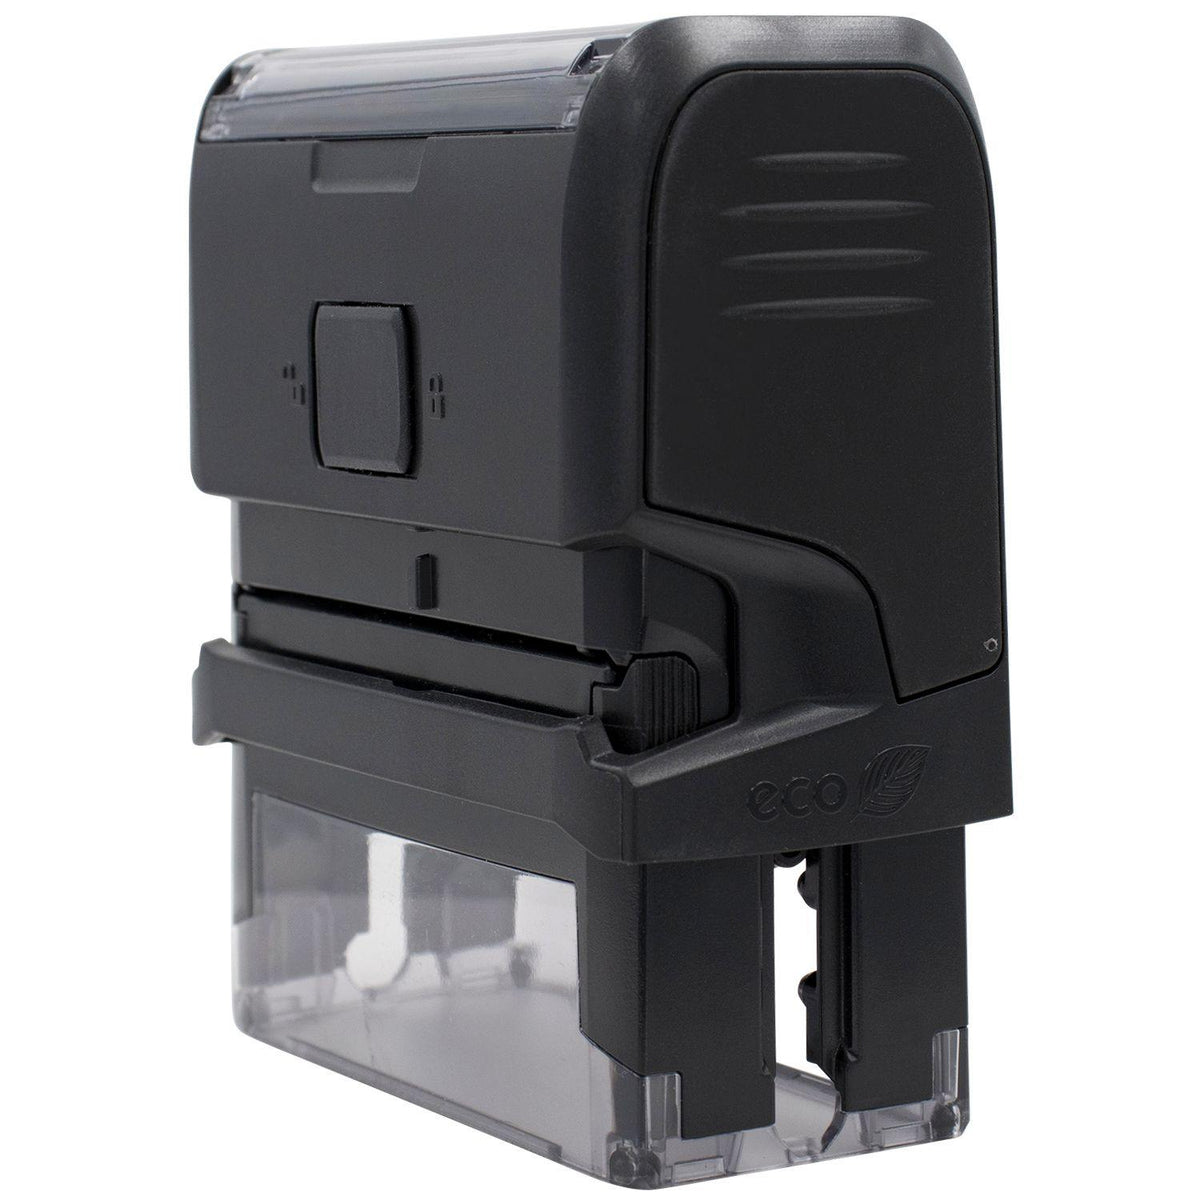 Large Self-Inking Do Not Bend Stamp - Engineer Seal Stamps - Brand_Trodat, Impression Size_Large, Stamp Type_Self-Inking Stamp, Type of Use_General, Type of Use_Postal &amp; Mailing